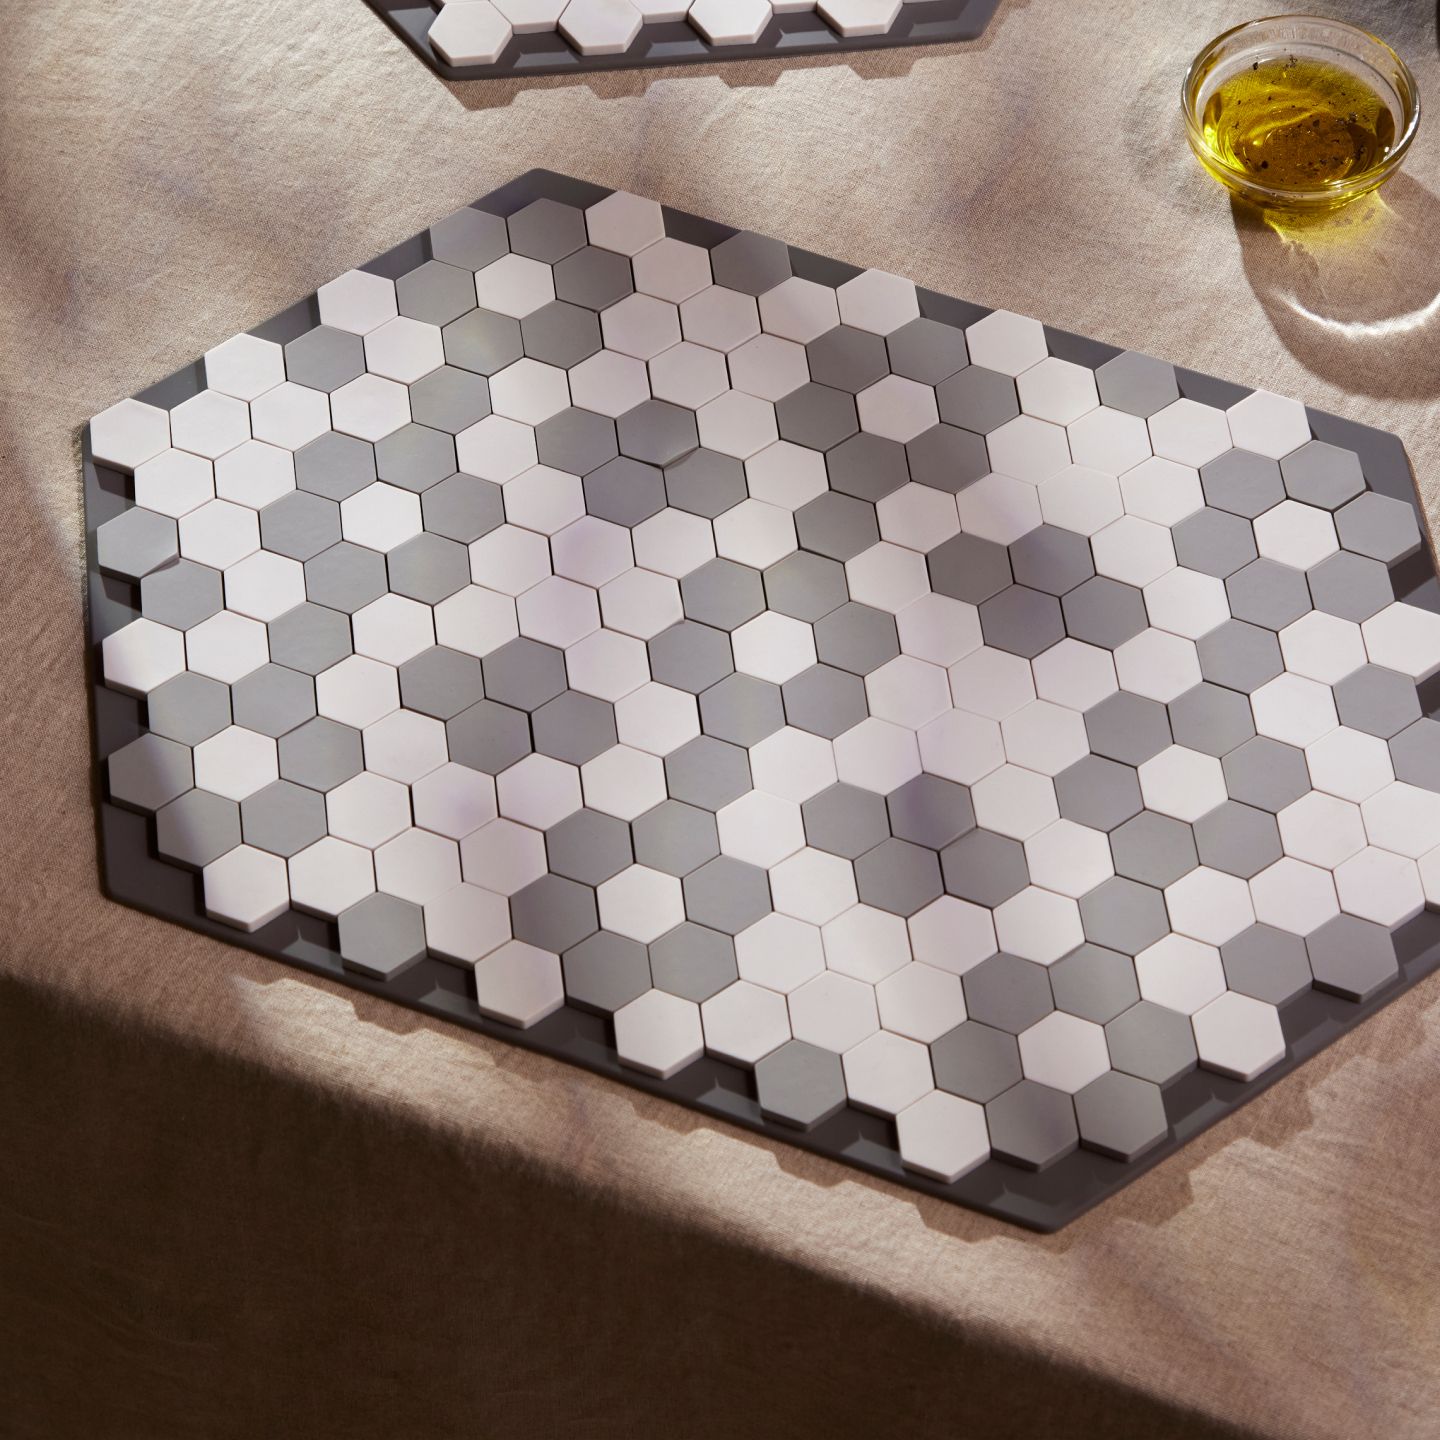 A placemat with a floral tile design on a table.